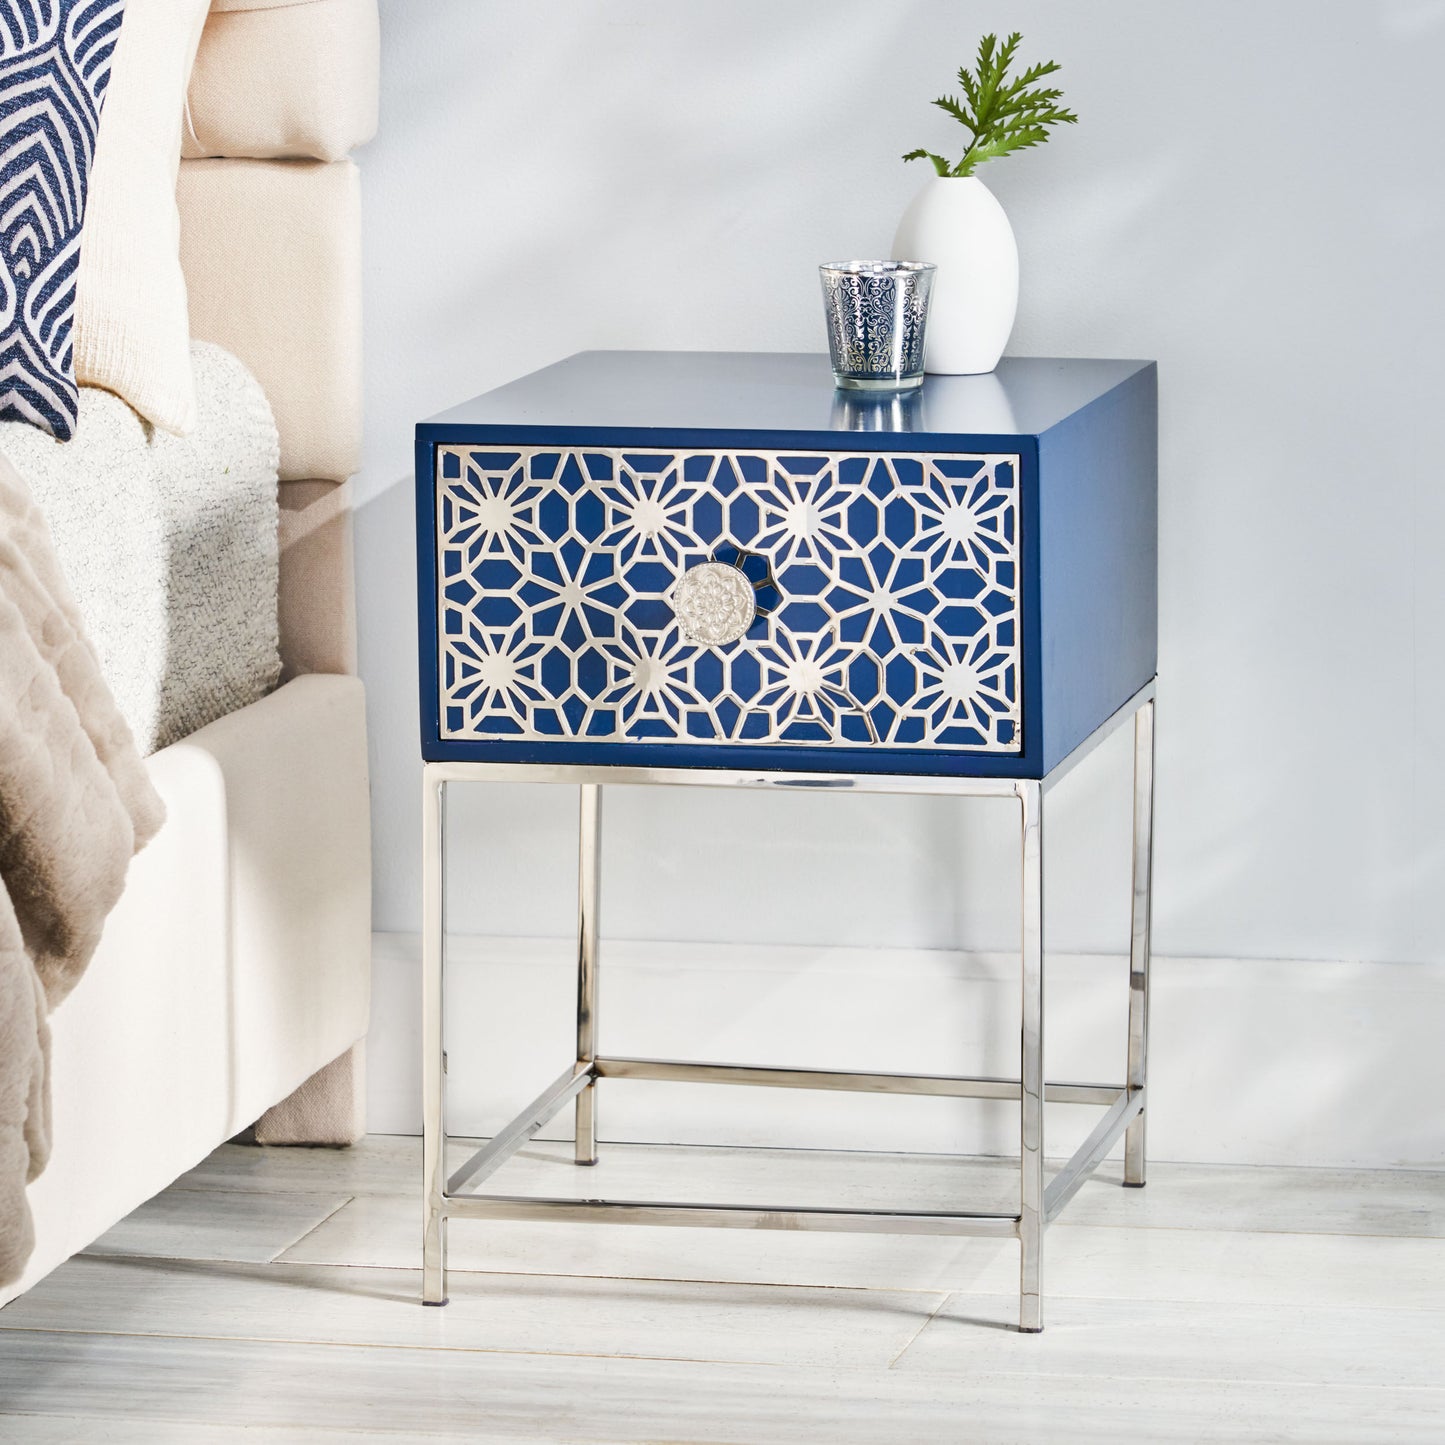 Morella Modern Glam Handcrafted Moroccan Mesh Nightstand, Navy Blue and Nickel